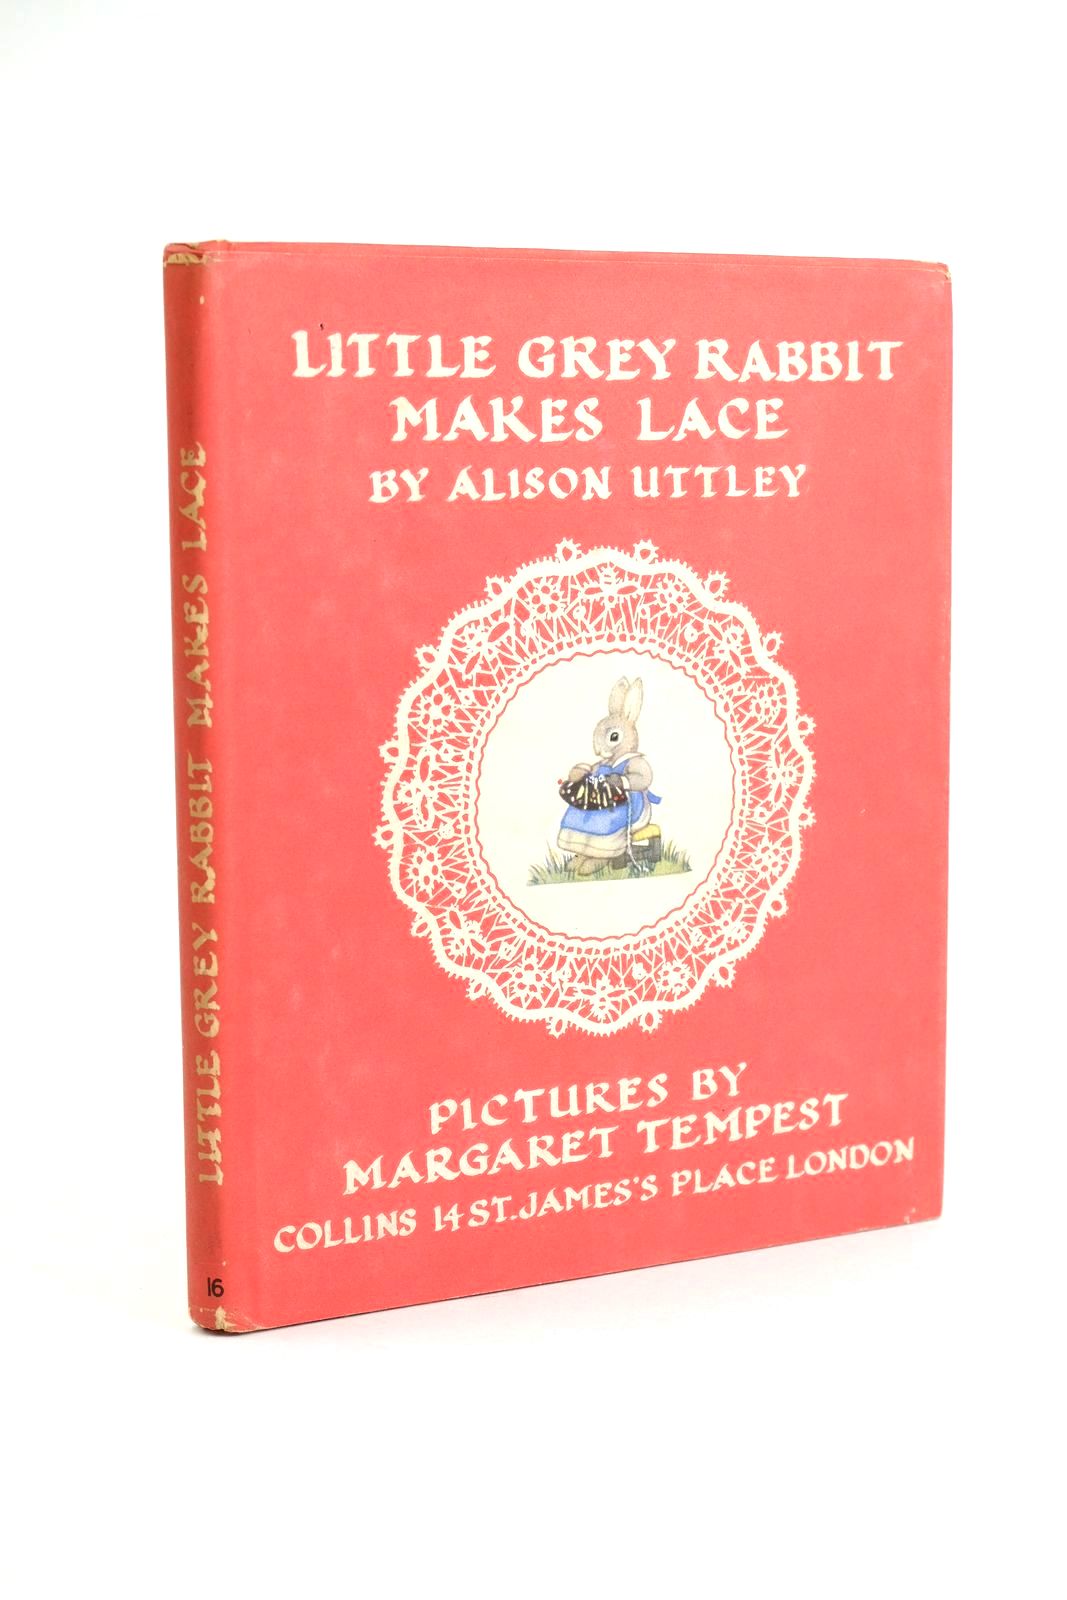 Photo of LITTLE GREY RABBIT MAKES LACE written by Uttley, Alison illustrated by Tempest, Margaret published by Collins (STOCK CODE: 1323835)  for sale by Stella & Rose's Books